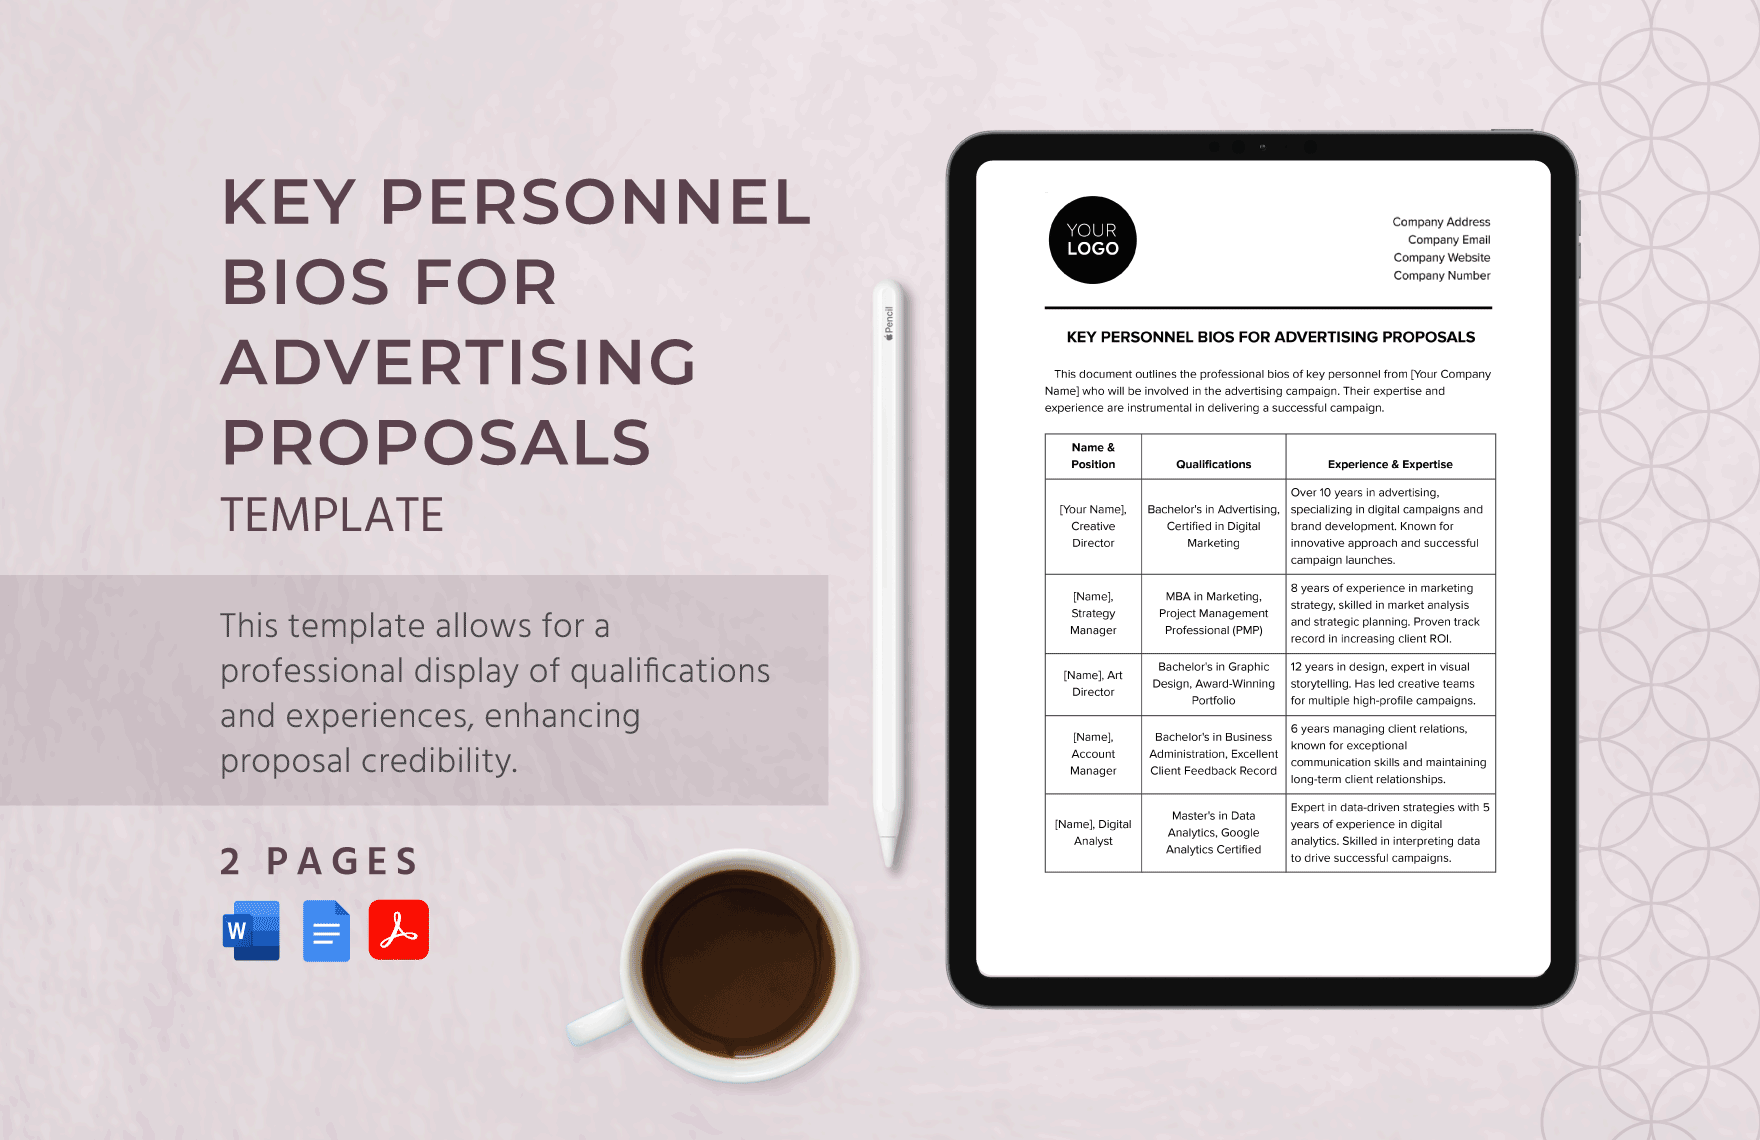 Key Personnel Bios for Advertising Proposals Template in Word, Google Docs, PDF